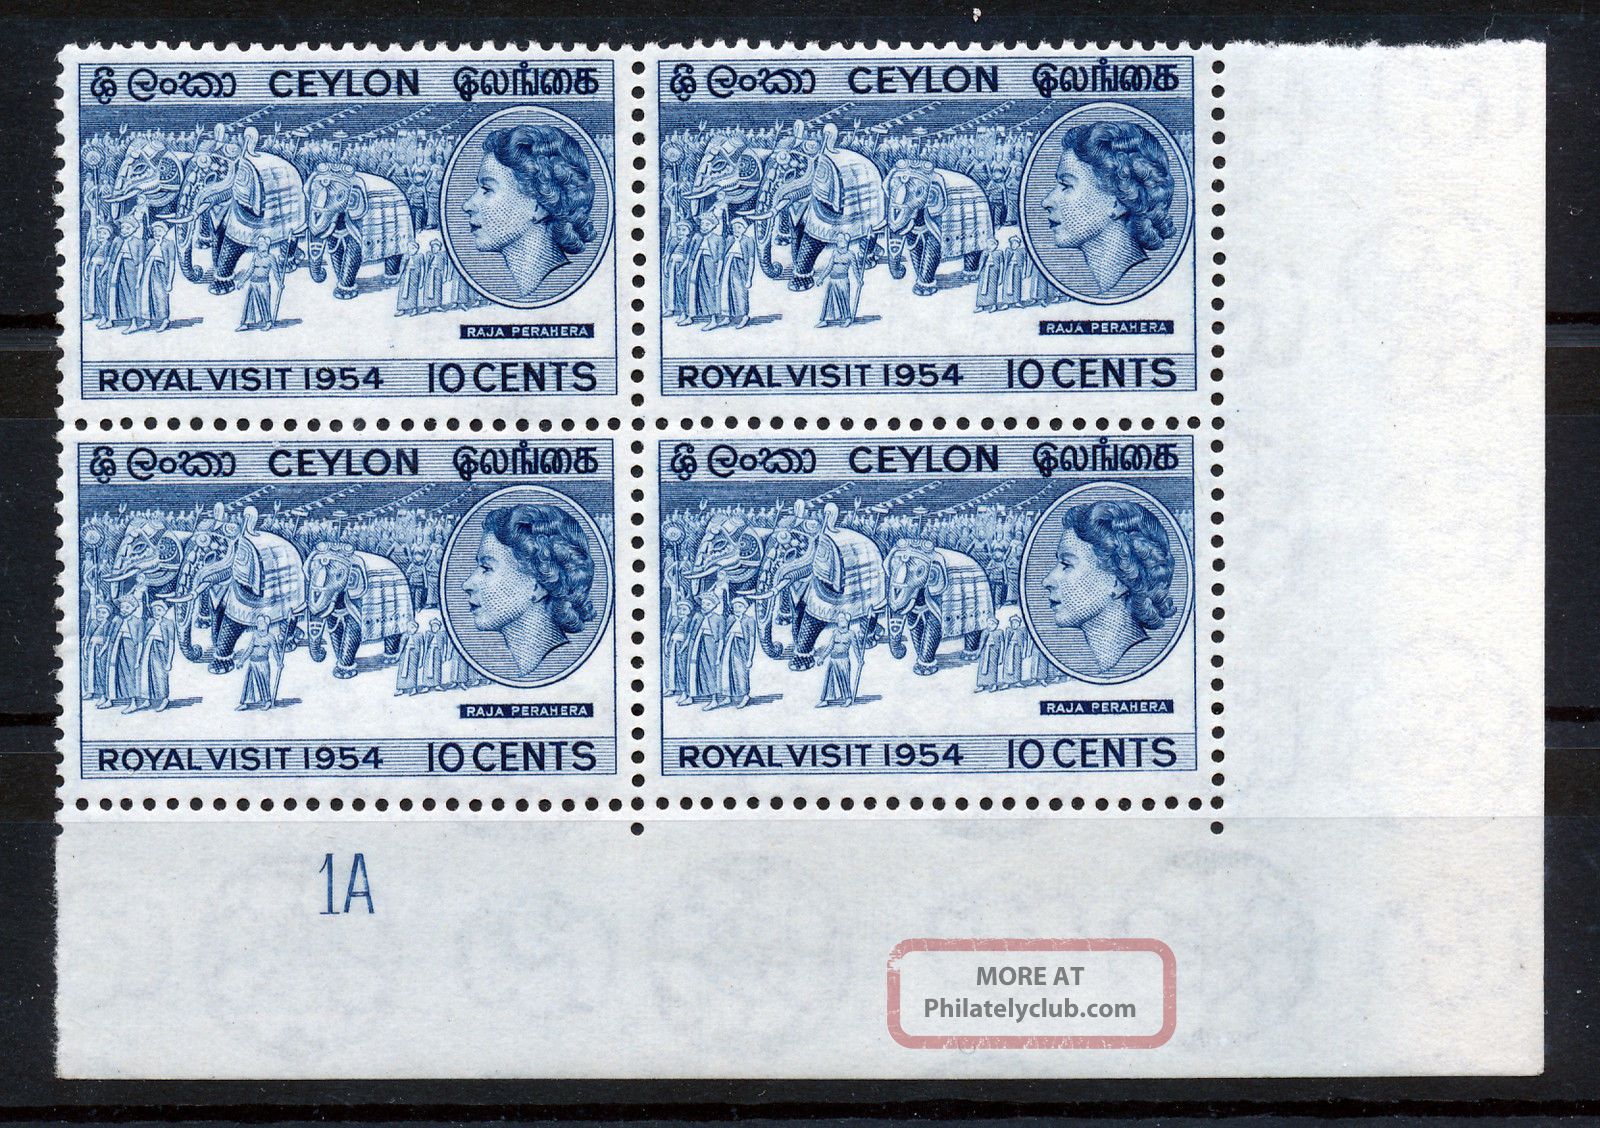 Ceylon 1954 Royal Visit Plate Block Of 4 Plate Number 1a Asia photo